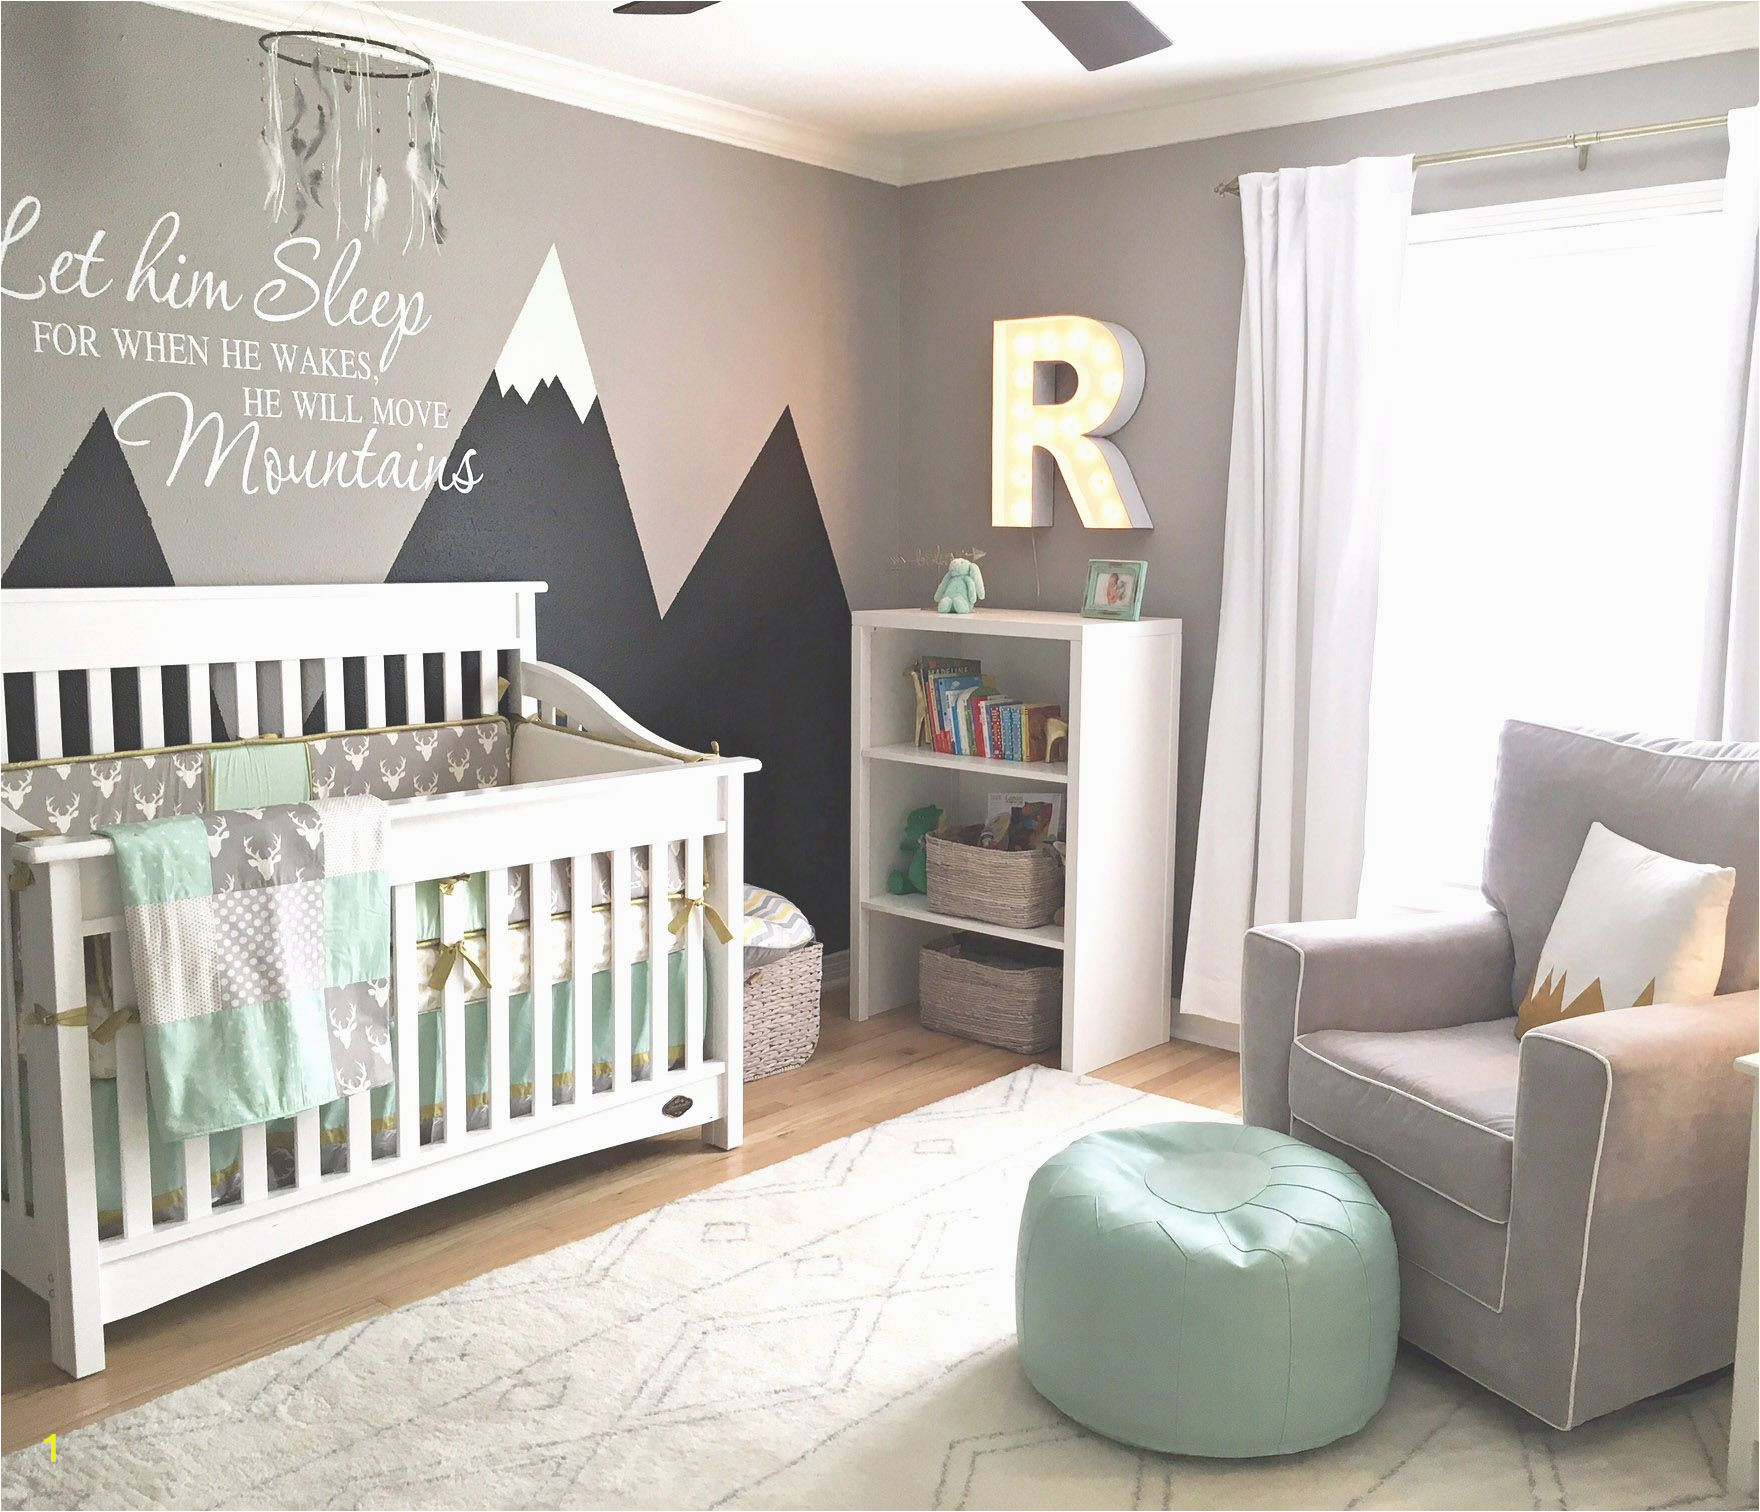 Baby Wall Mural Ideas 12 Nursery Trends for 2017